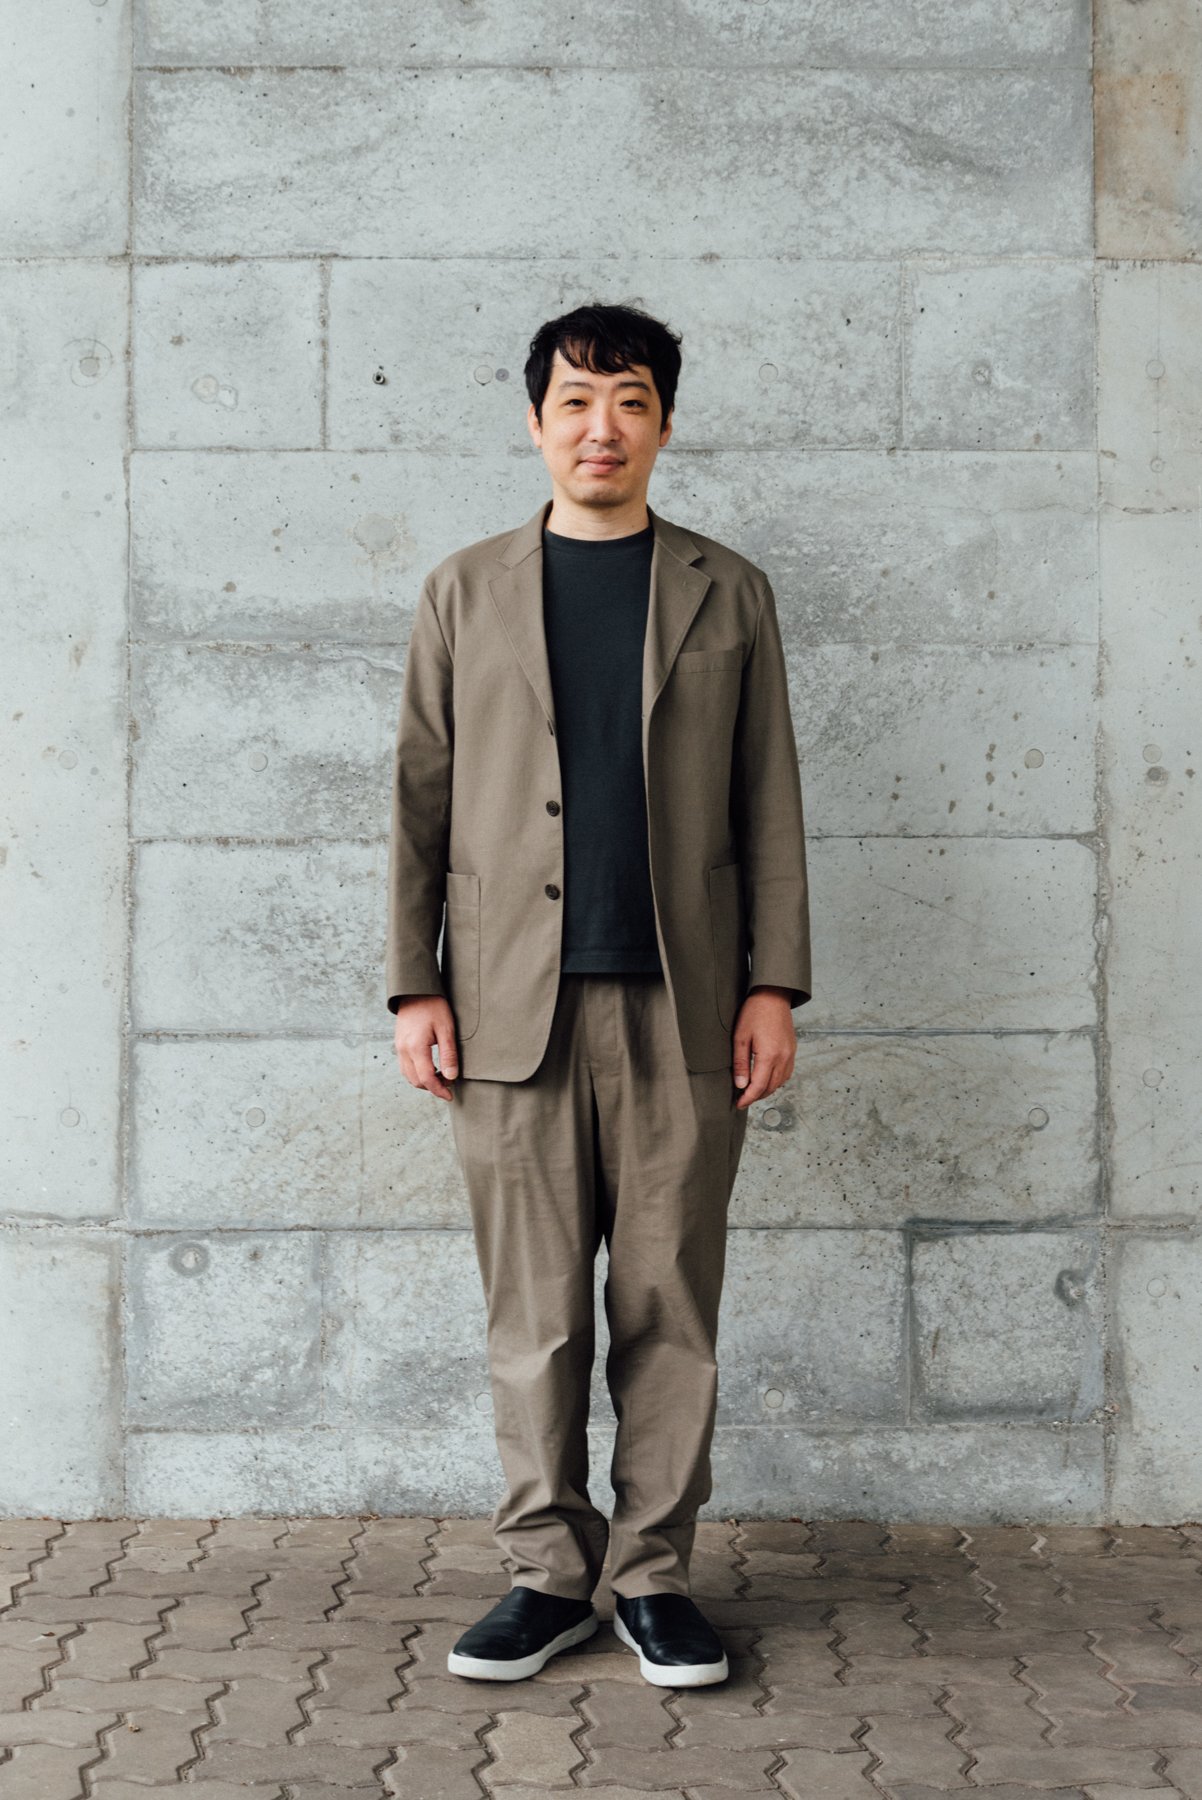  Suit: 40% POLYESTER 37% COMPOSITE FIBER 23% LINEN  “I bought this suit to wear at my new job. I liked the style when I wore it for the price, but the material was cheap and in the end I didn't like it."    スーツ： ポリエステル　40% 複合繊維　37% 麻　23%  「新しい職場で着ようと